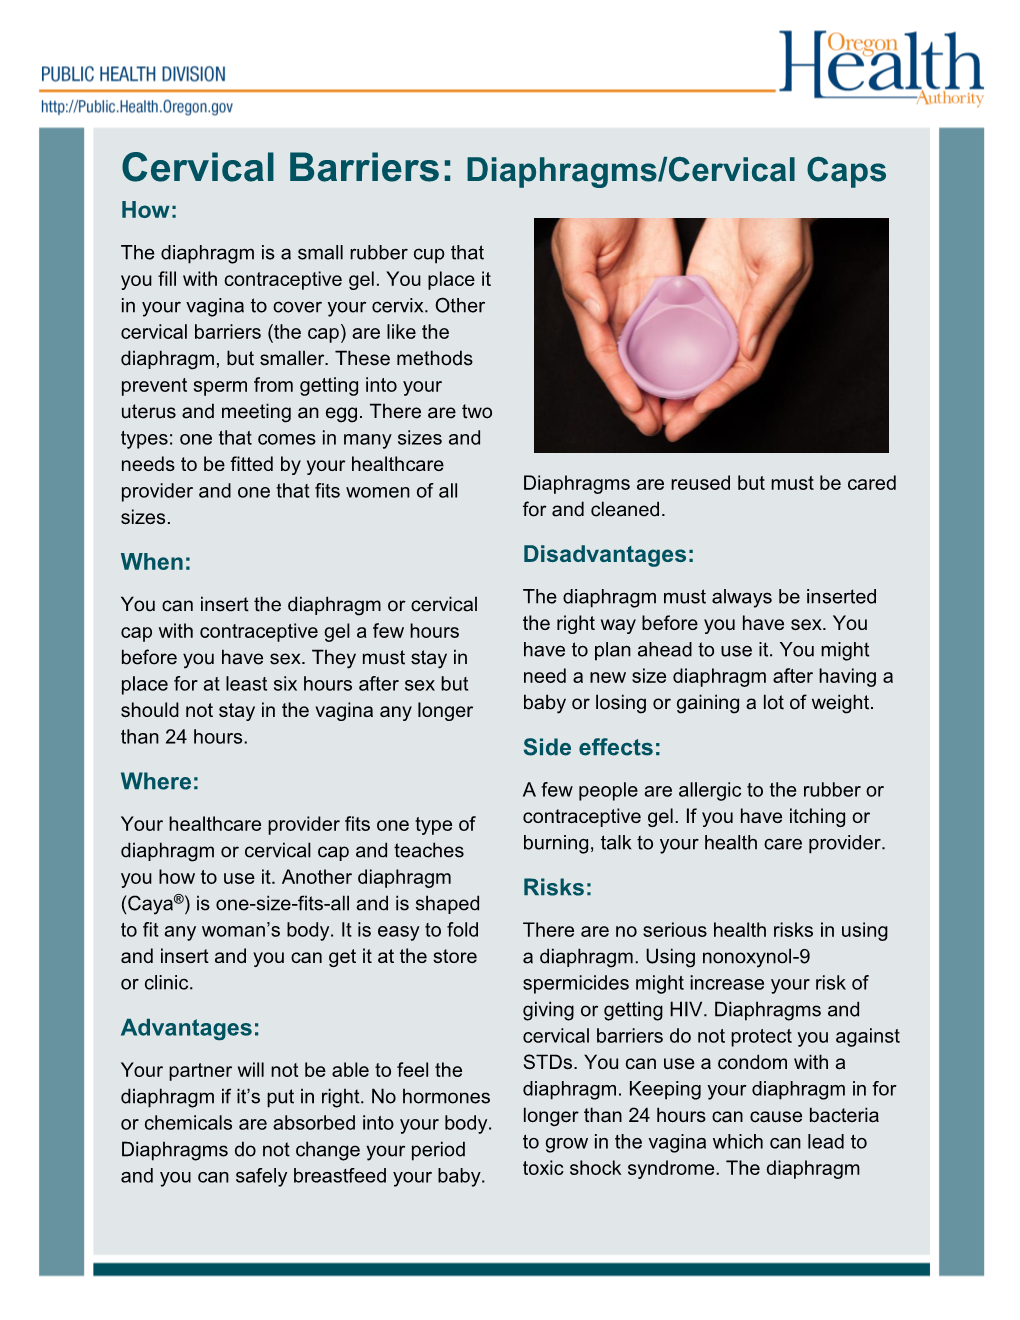 Diaphragms/Cervical Caps How: the Diaphragm Is a Small Rubber Cup That You Fill with Contraceptive Gel